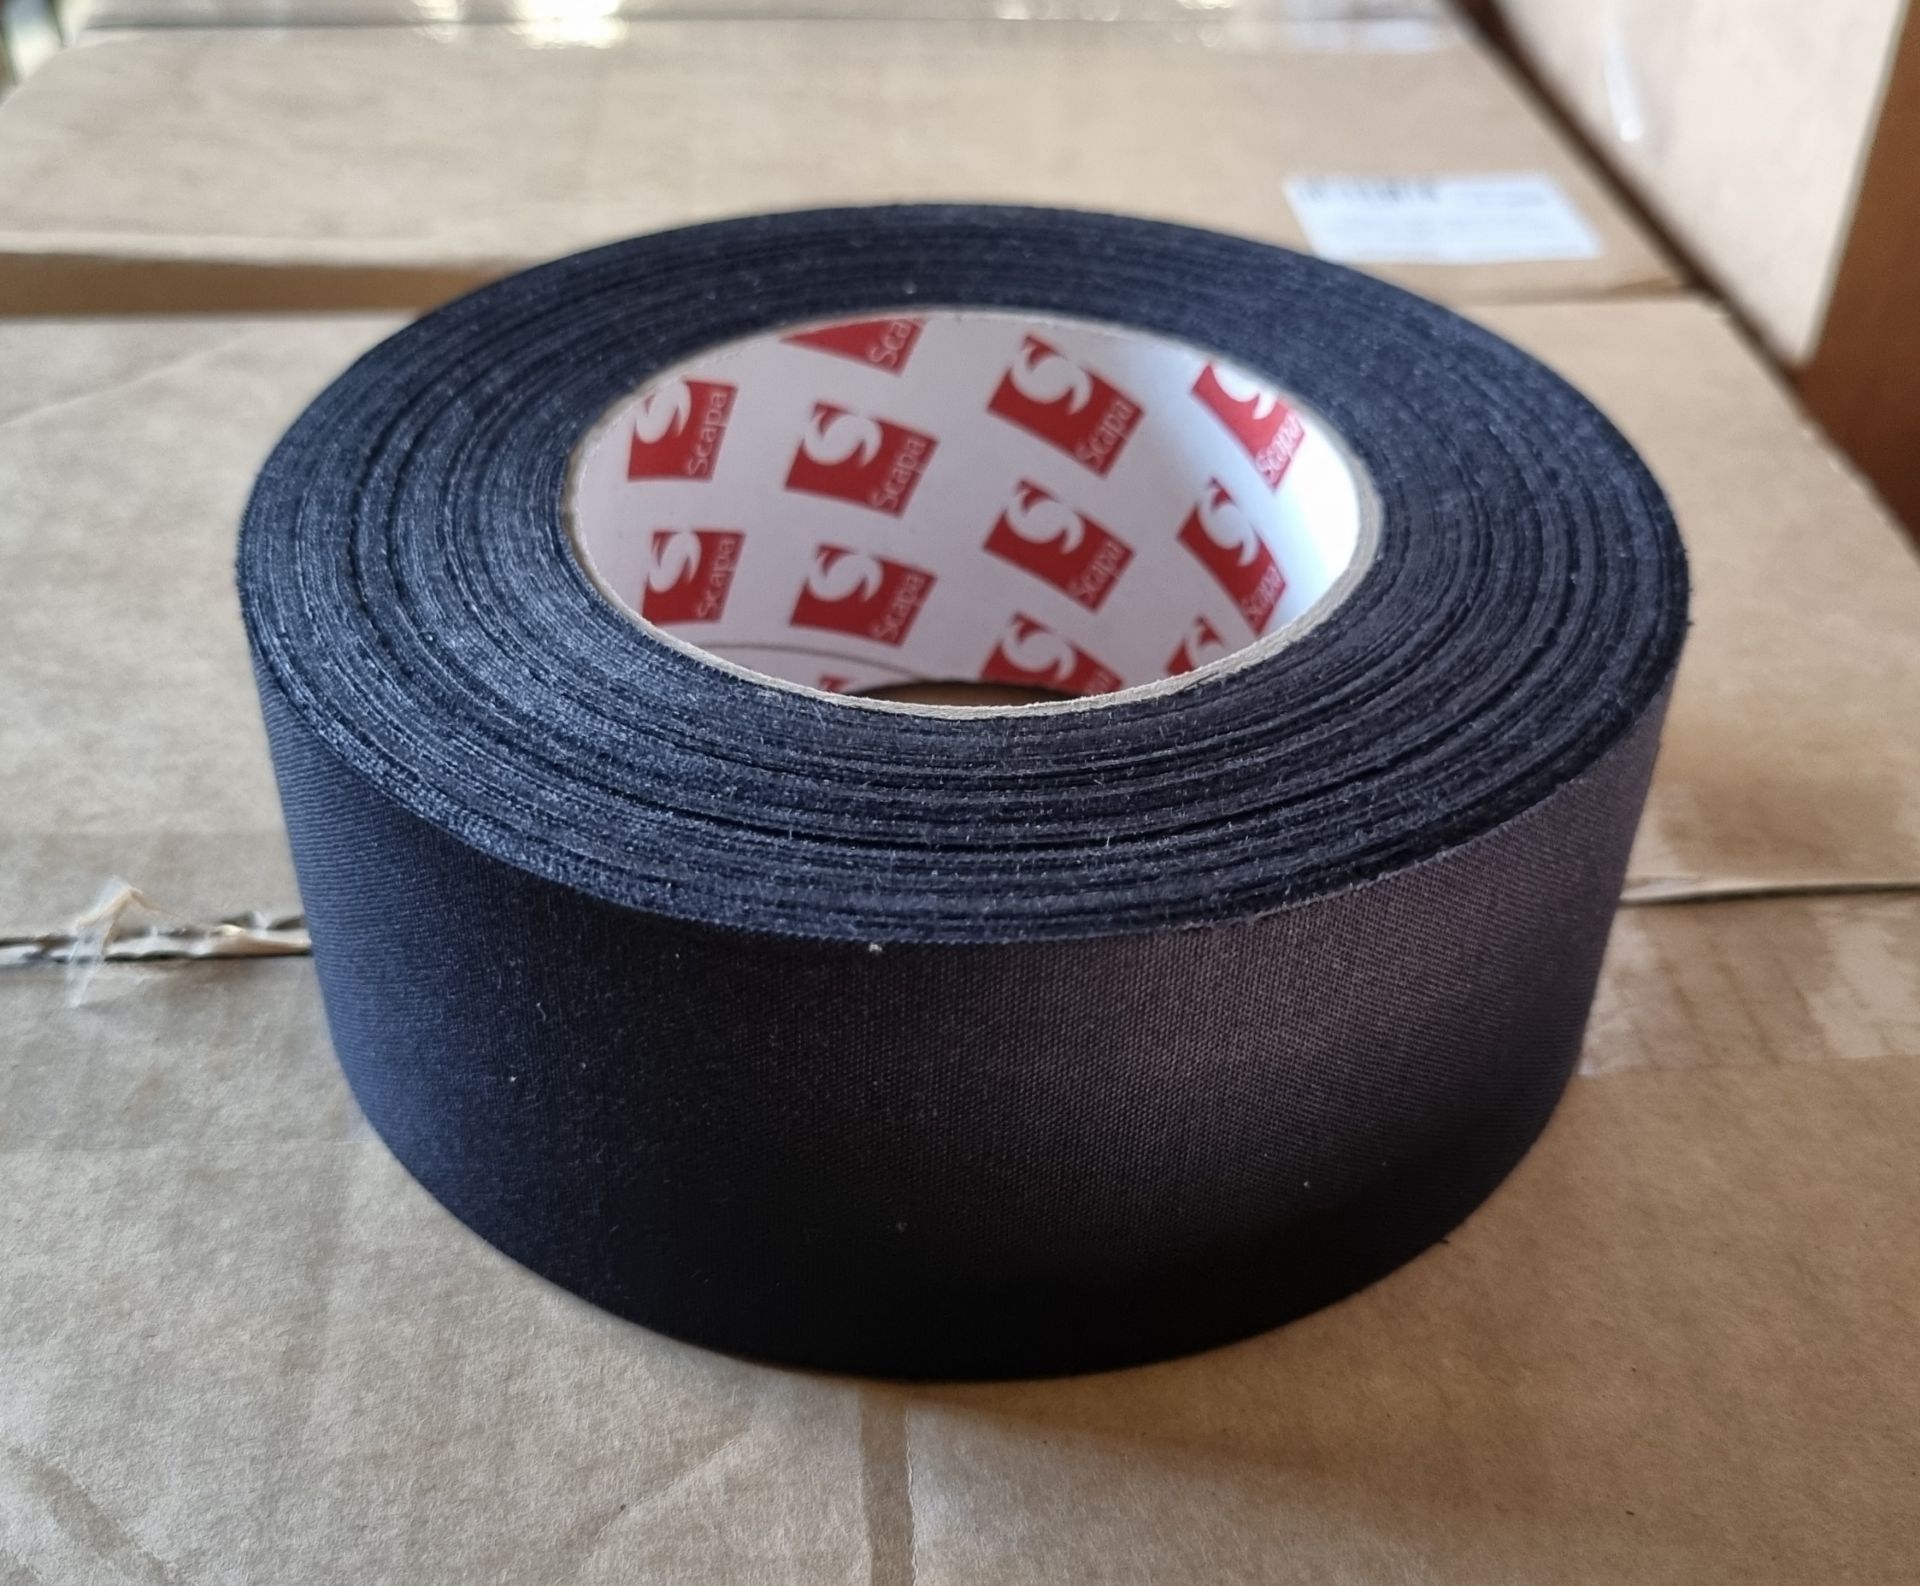 3x boxes of Scapa Rayon cloth fabric black adhesive tape, 50mm width, 50m length, box of 16 rolls - Image 6 of 7